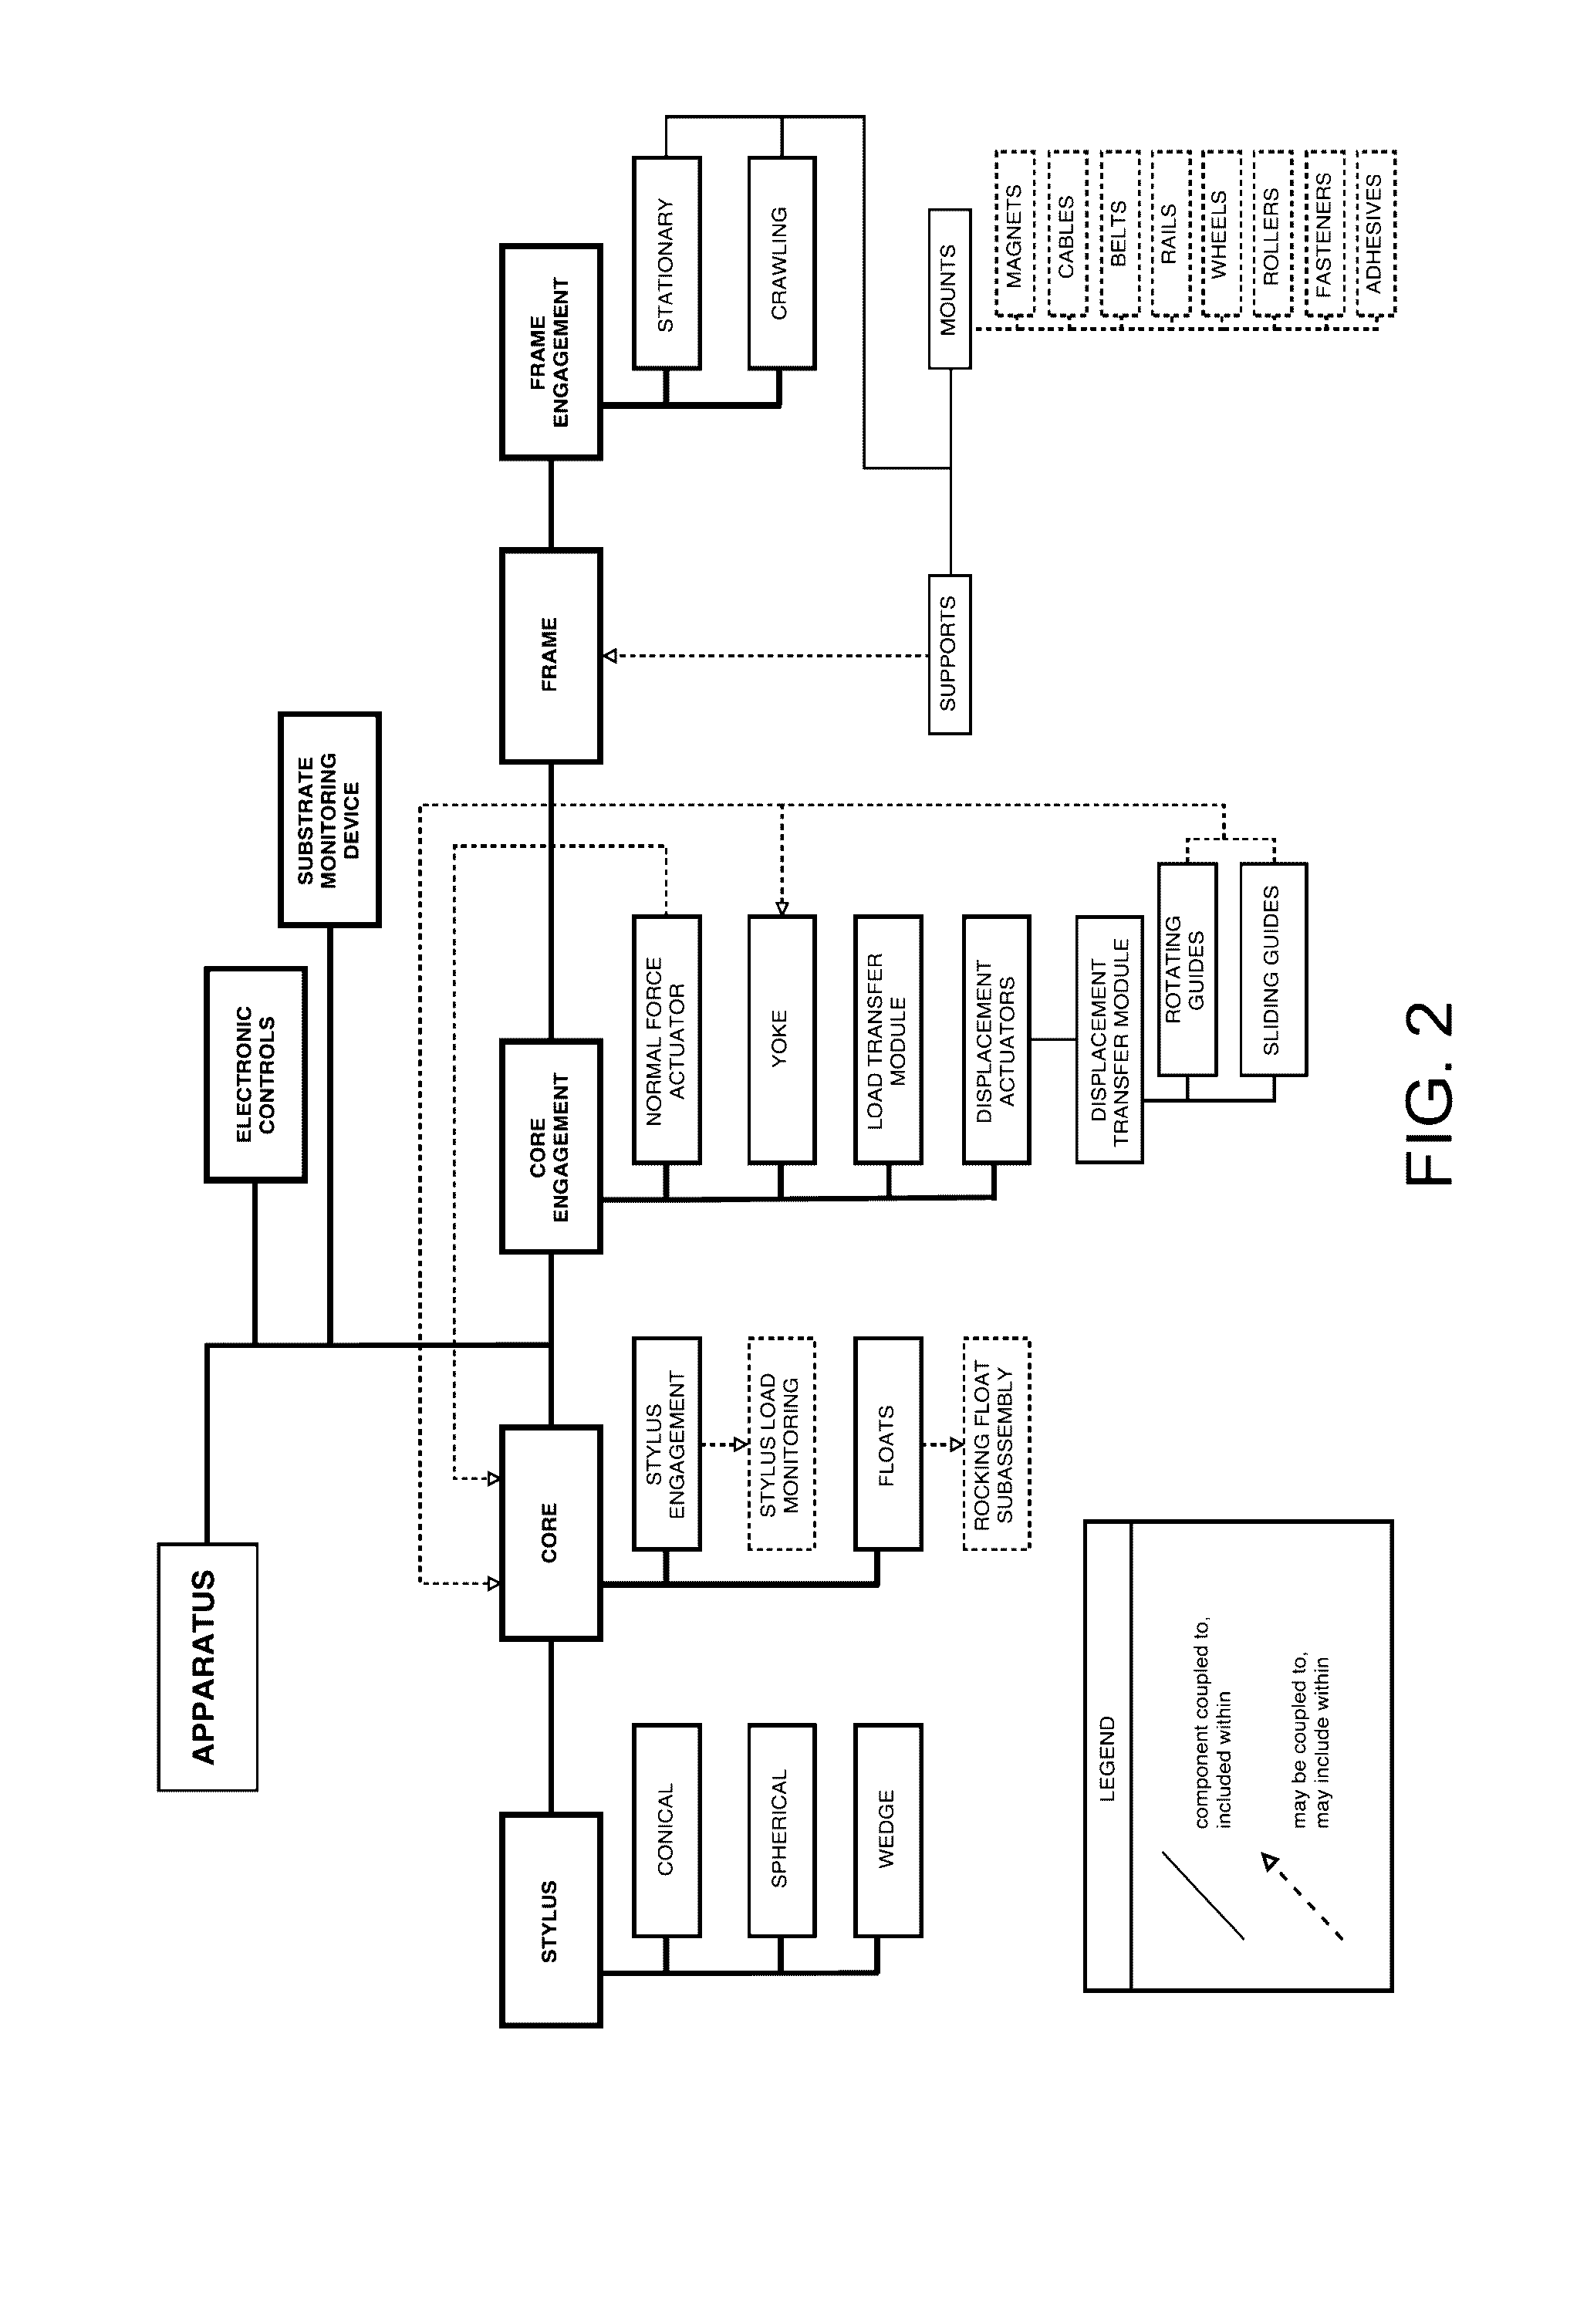 Contact Mechanic Tests using Stylus Alignment to Probe Material Properties